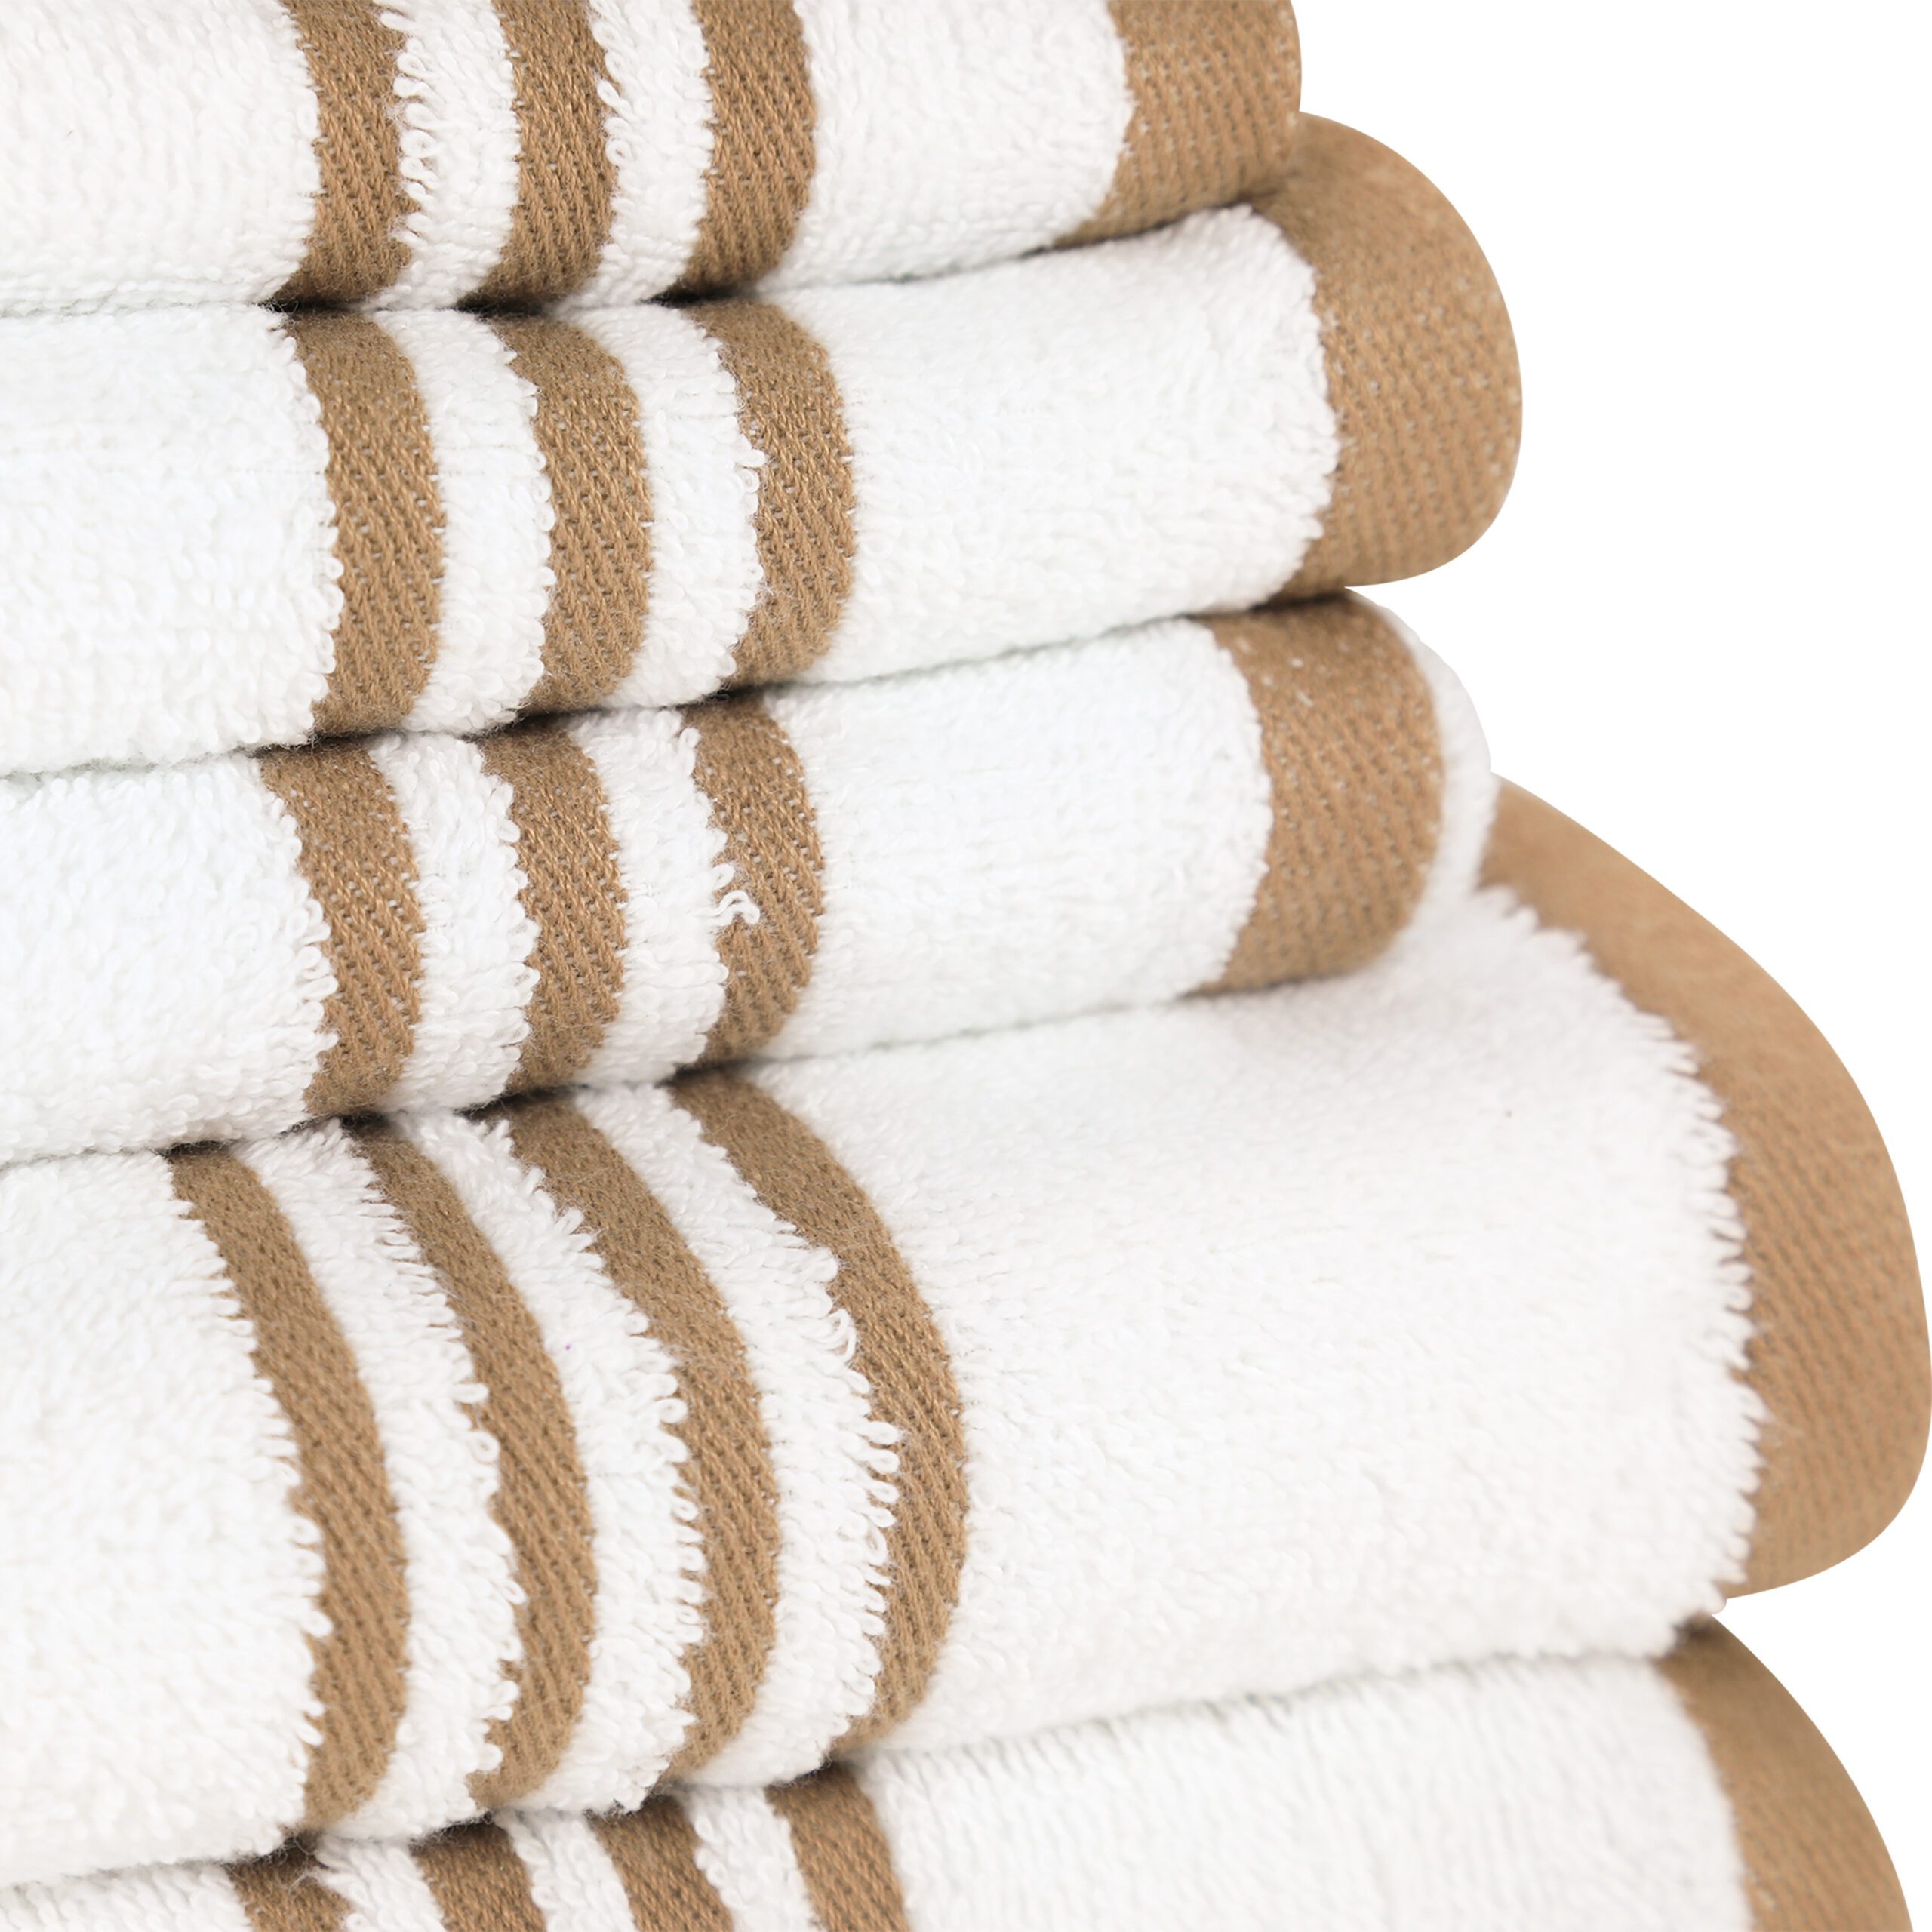 Arkwright Soft & Absorbent 100% Cotton Luxury Bath Towels (4 Pack or C